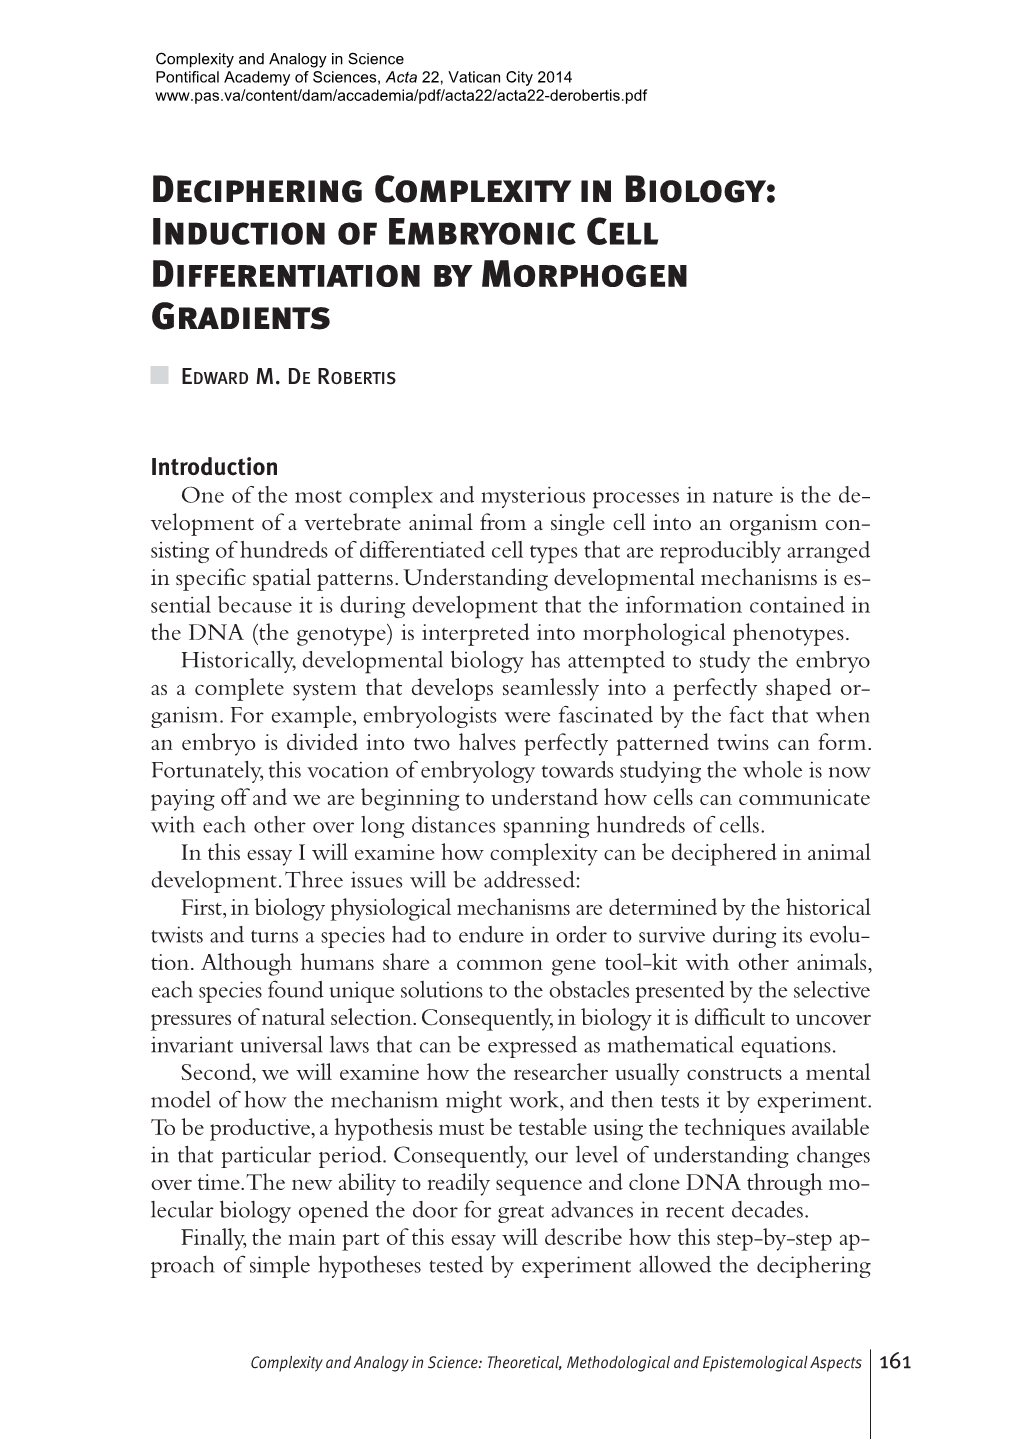 Induction of Embryonic Cell Differentiation by Morphogen Gradients